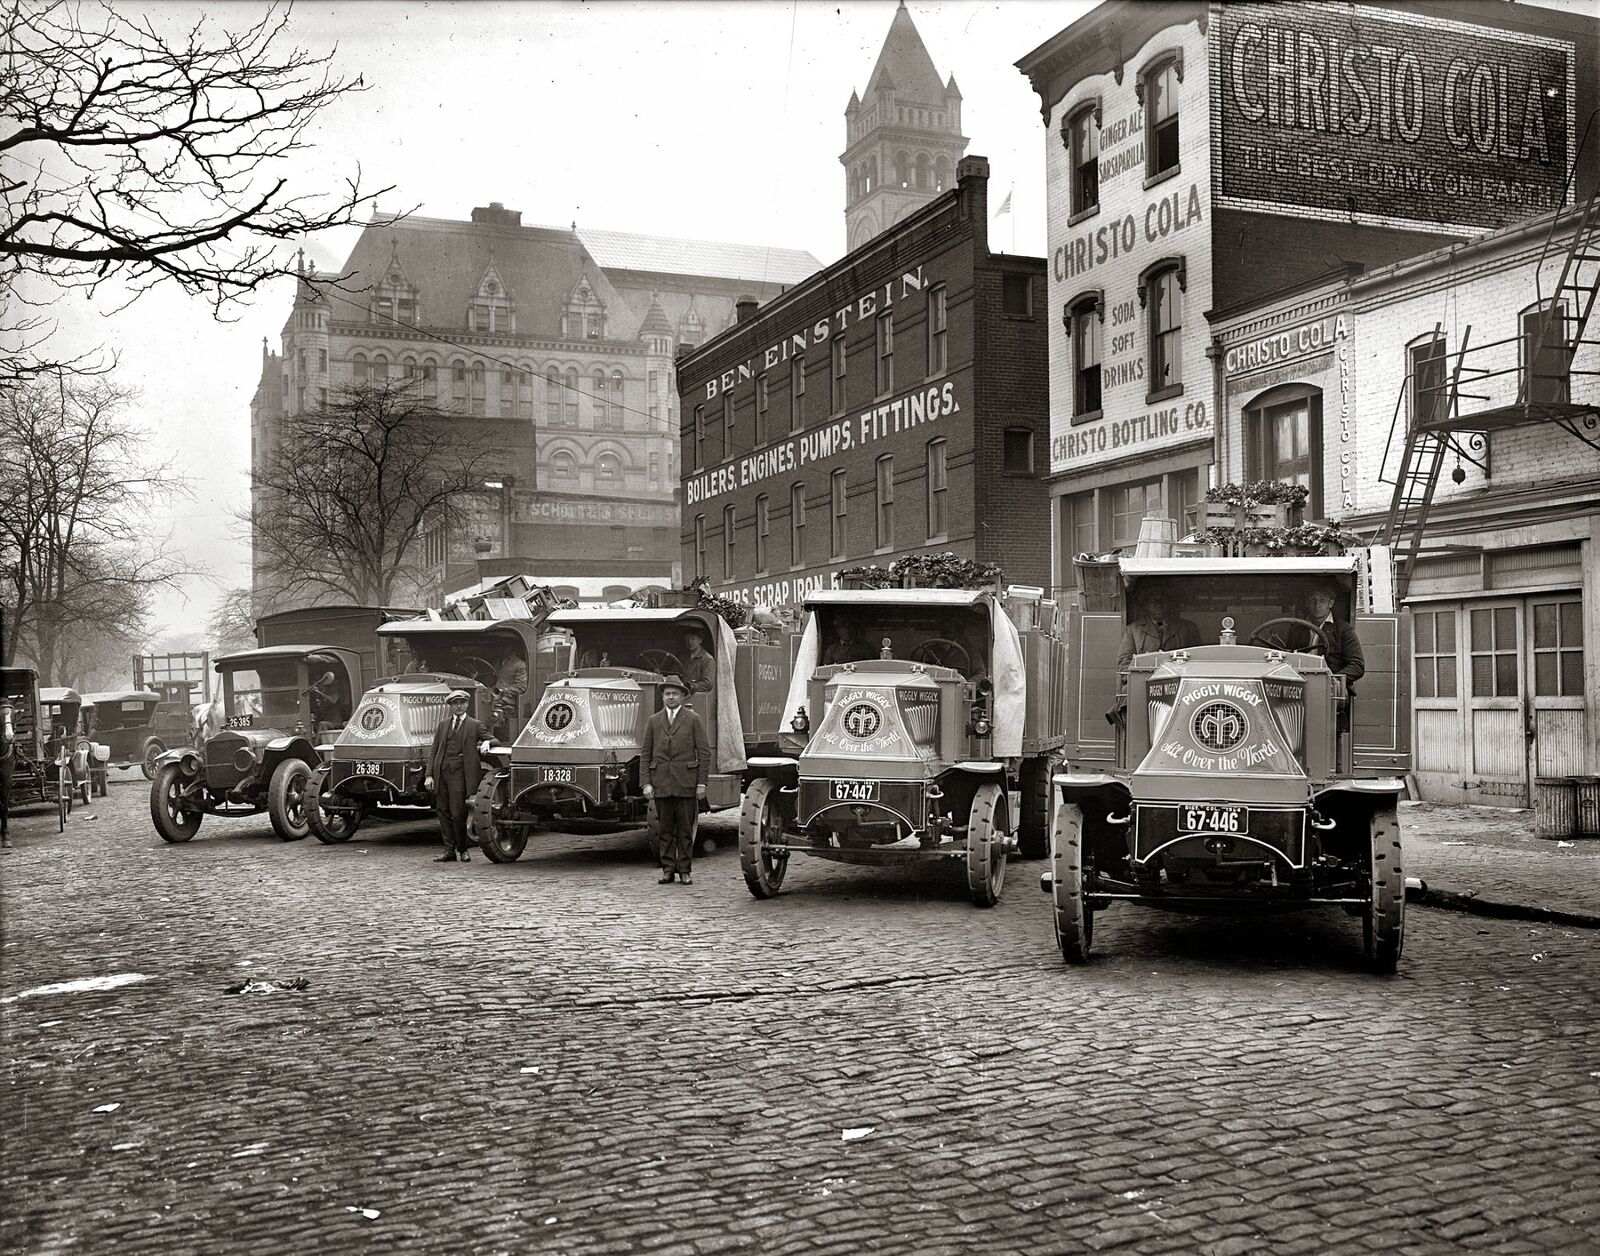 1924 PIGGLY WIGGLY Vintage Delivery Trucks in Washington DC 8.5X11 PHOTO